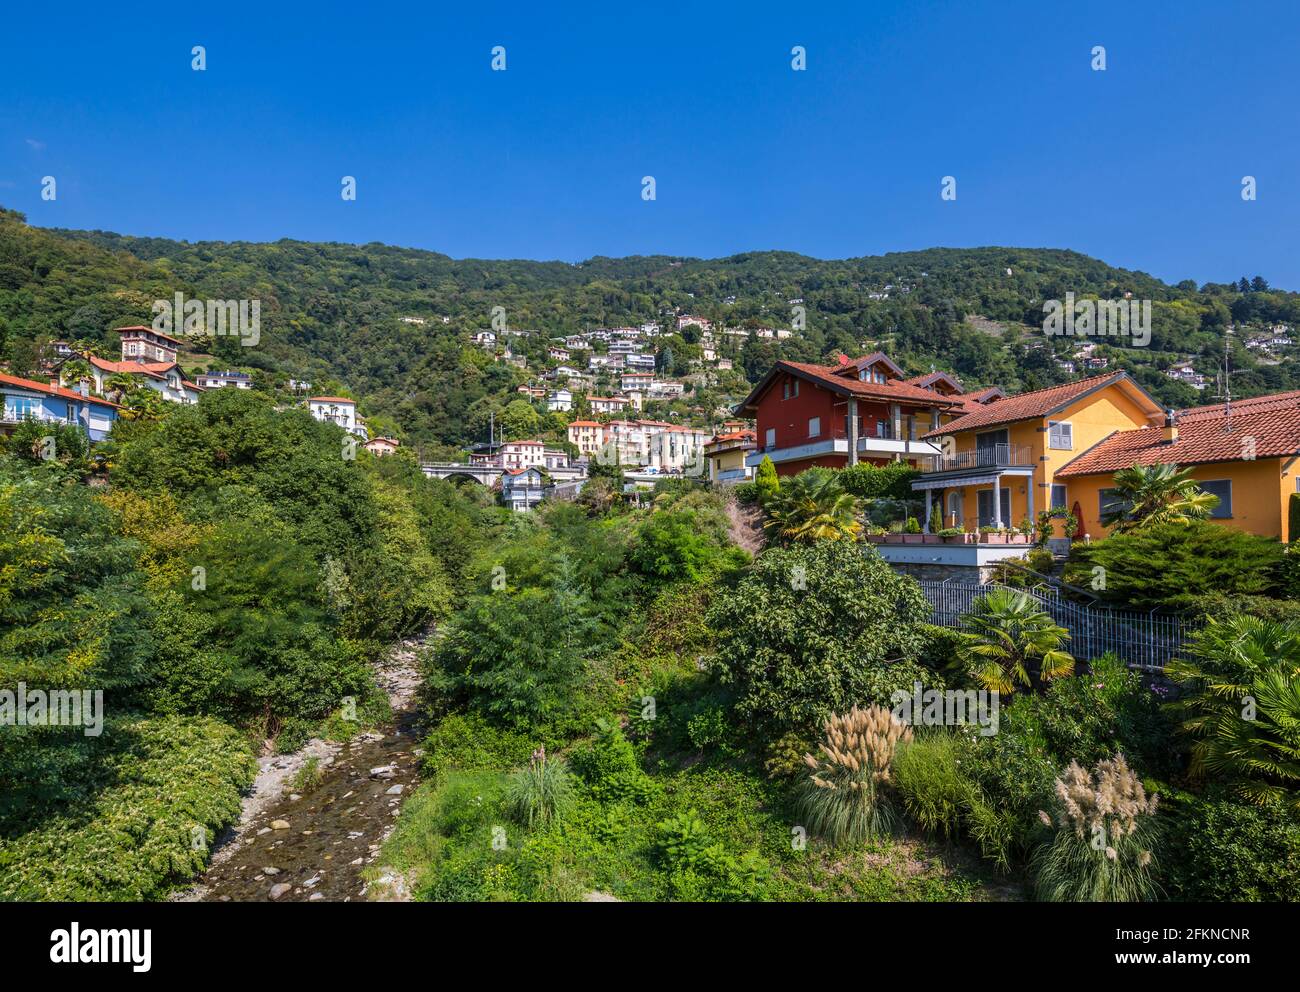 View of lakeside town from harbour at Cannero Riviera, Lake Maggiore, Piedmont, Italy, Europe Stock Photo